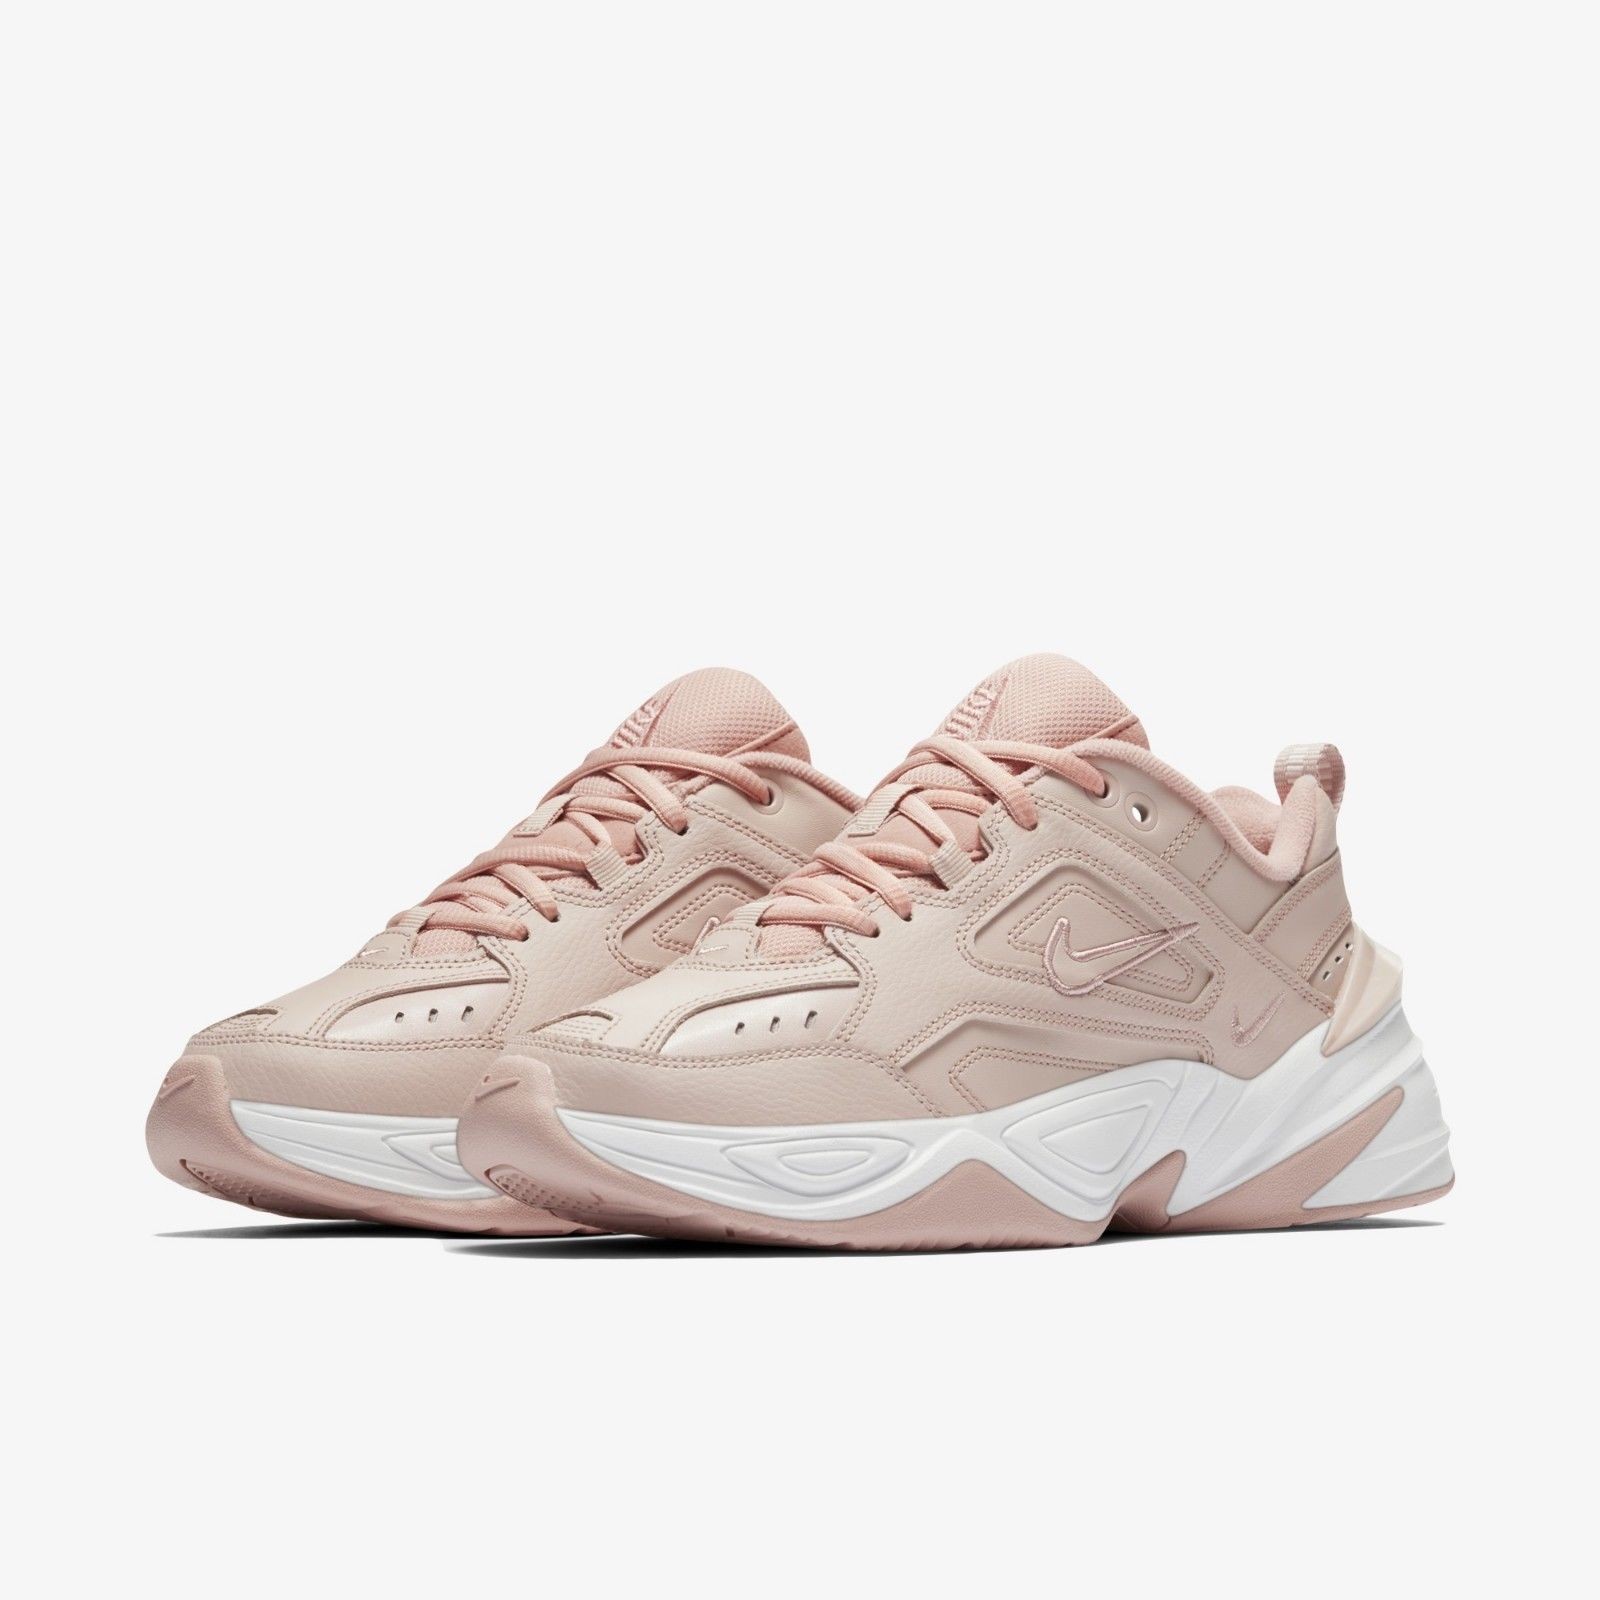 Nike M2K Tekno Particle Beige White Women Shoes Sneakers AO3108-202 ...